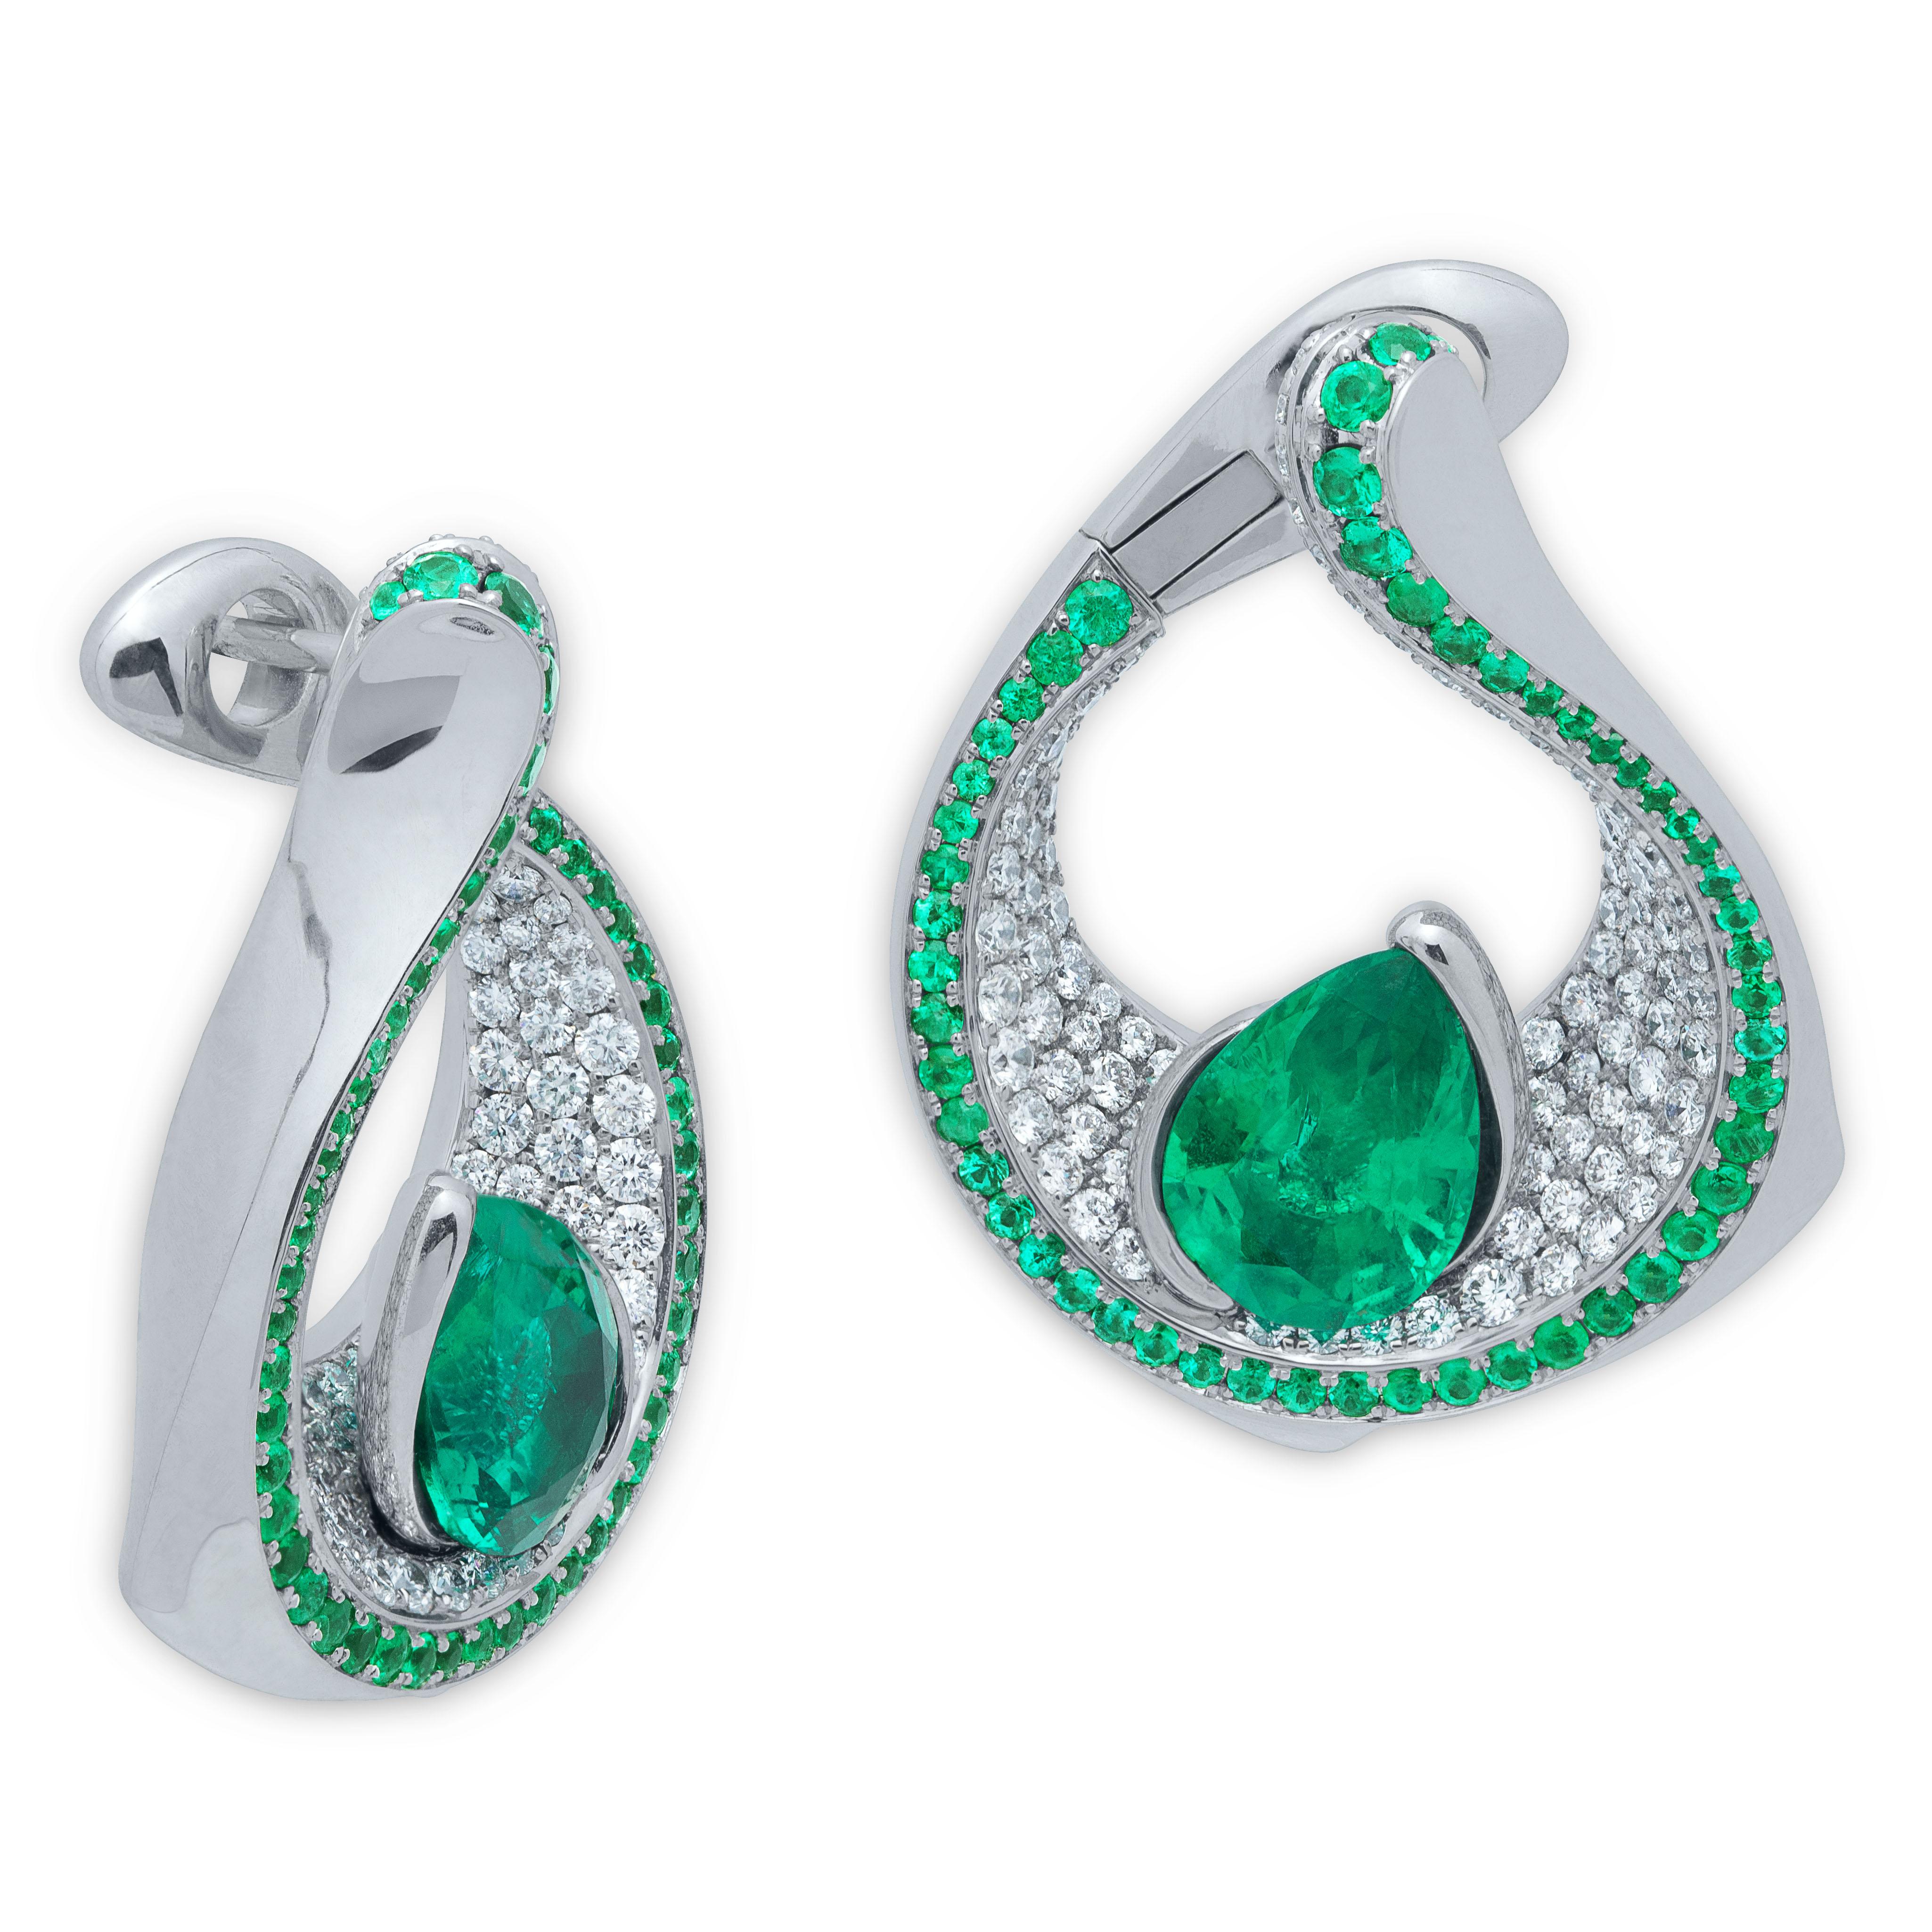 Emerald Pear Shape 4.22 Carat Diamonds Emeralds 18 Karat White Gold Earrings
Contrasting colors are always eye-catching. Our new Earrings are one of those. Two bright Pear-shaped 4.22 Carat Emeralds rests on a snow-white plateau of 240 Diamonds